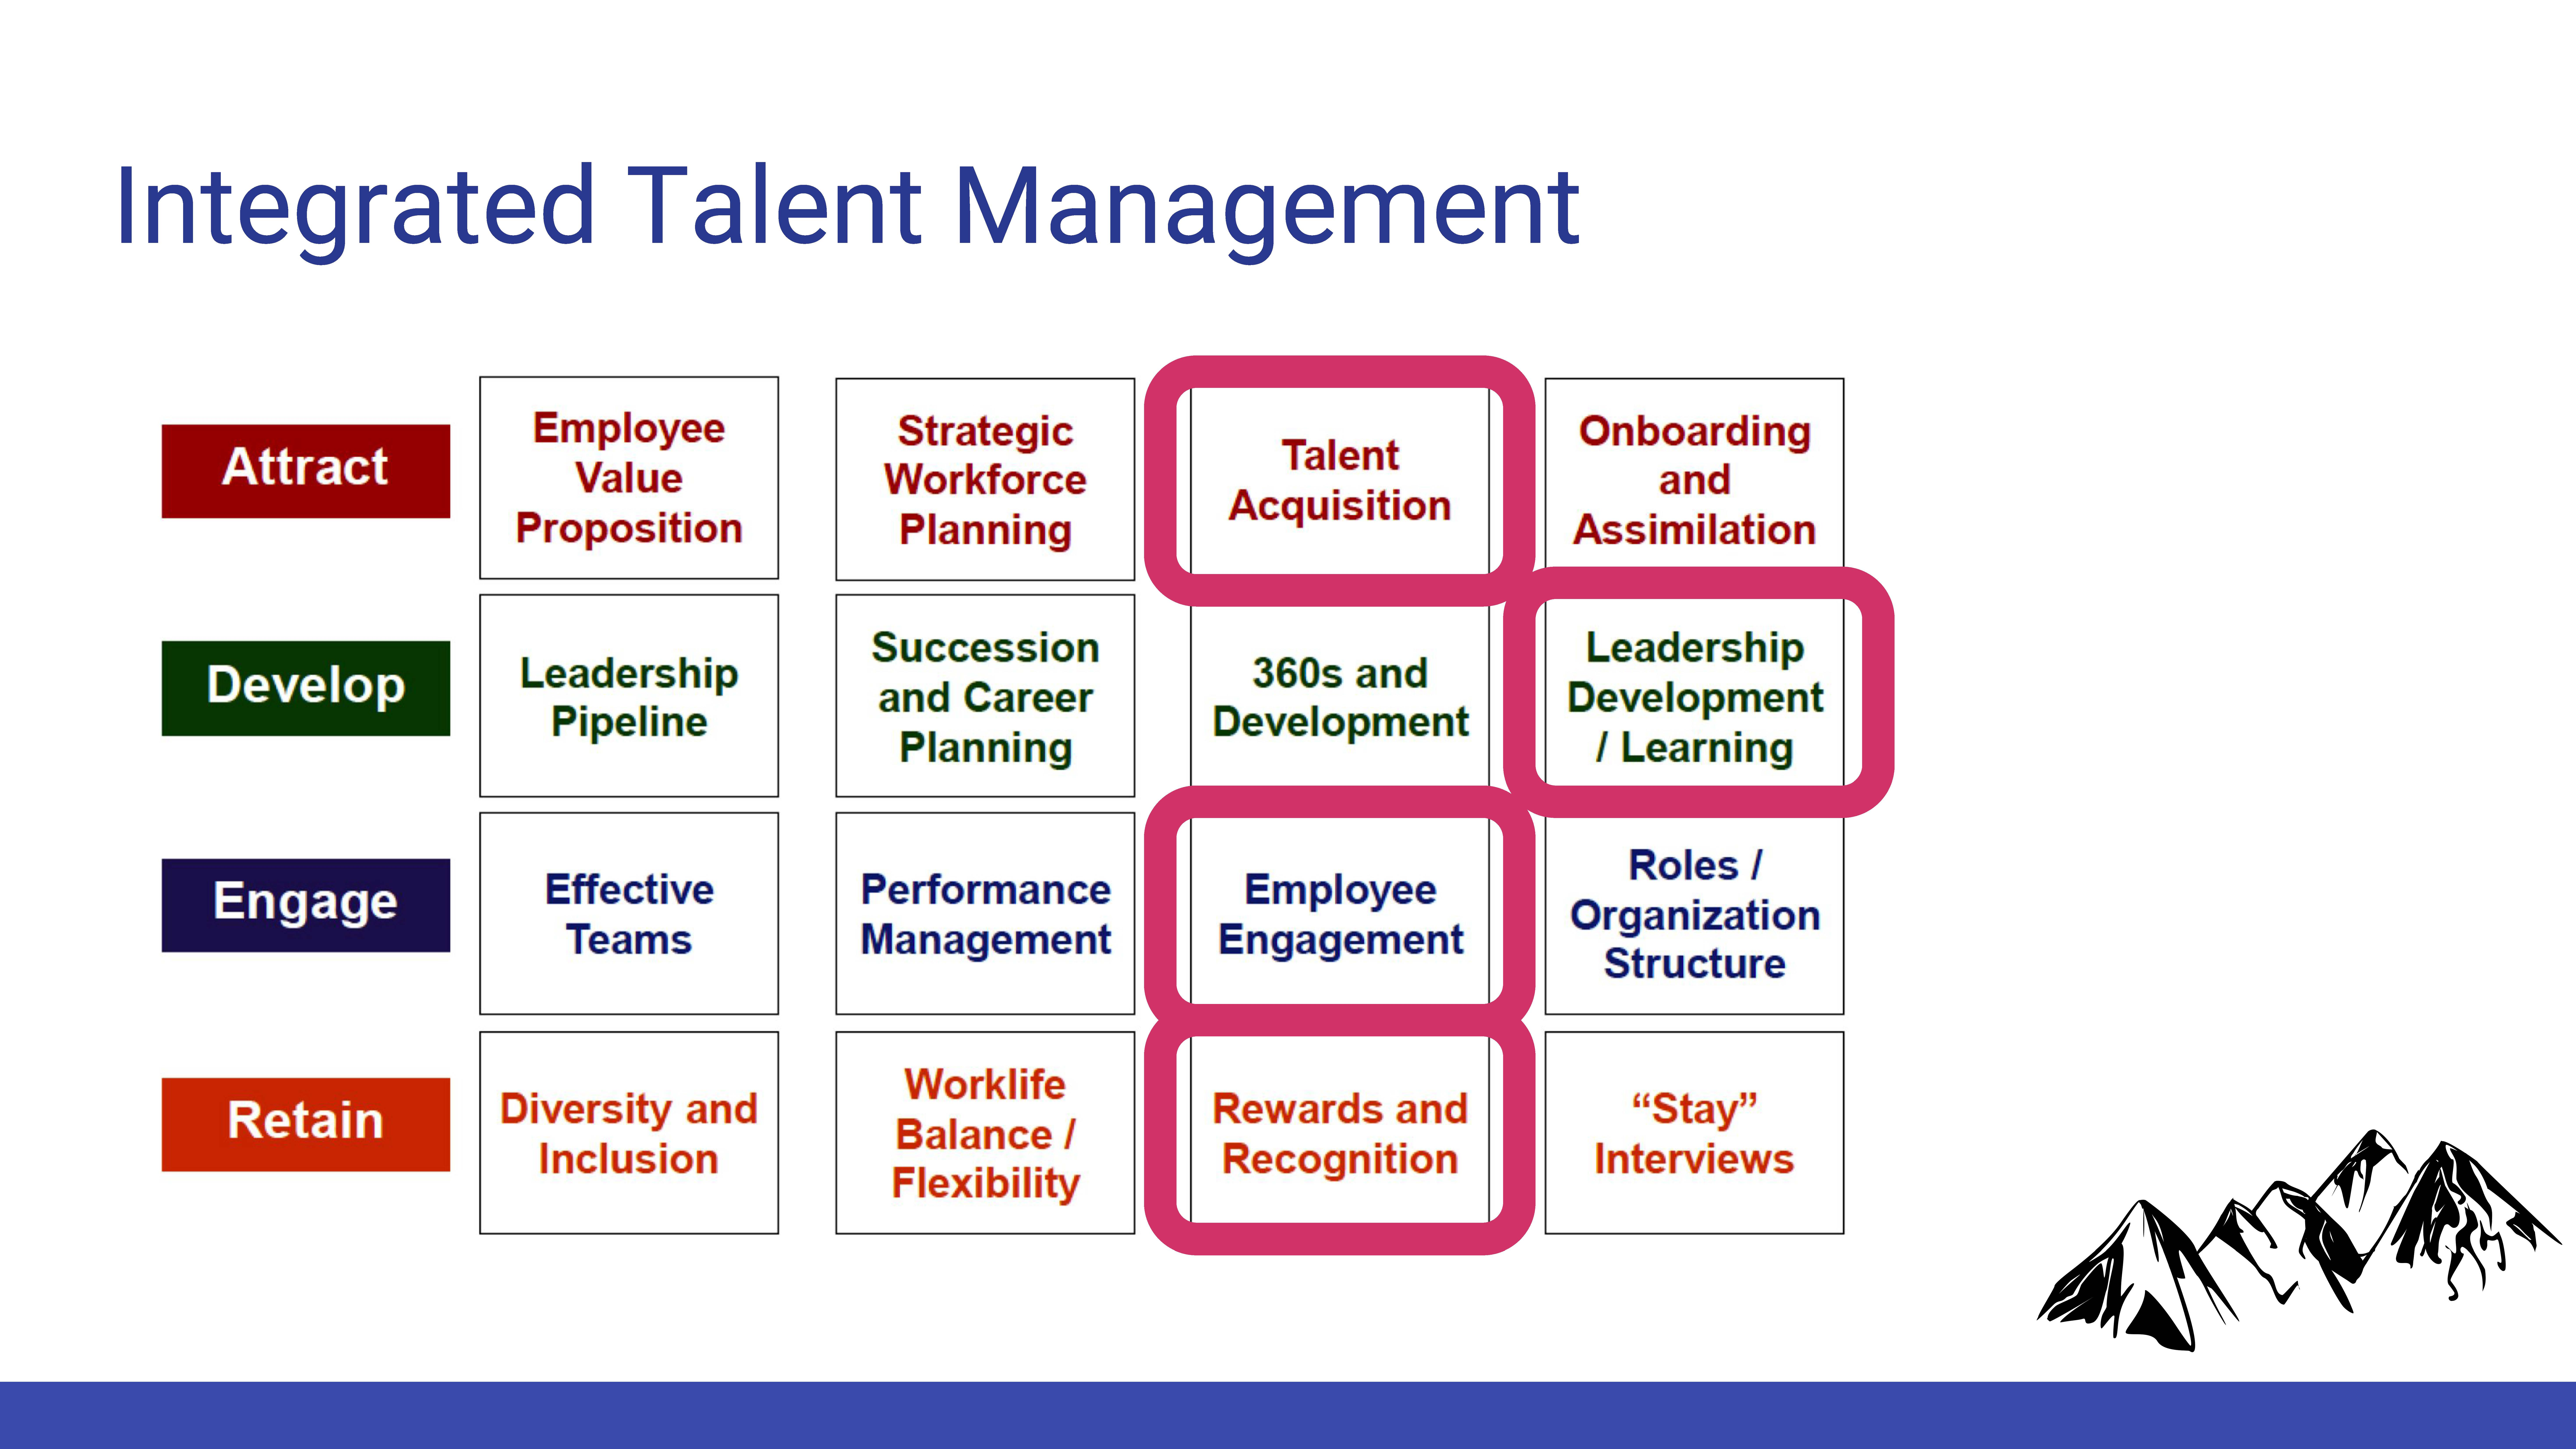 Analysis of Human Capital Management Strategy for Vail Resorts